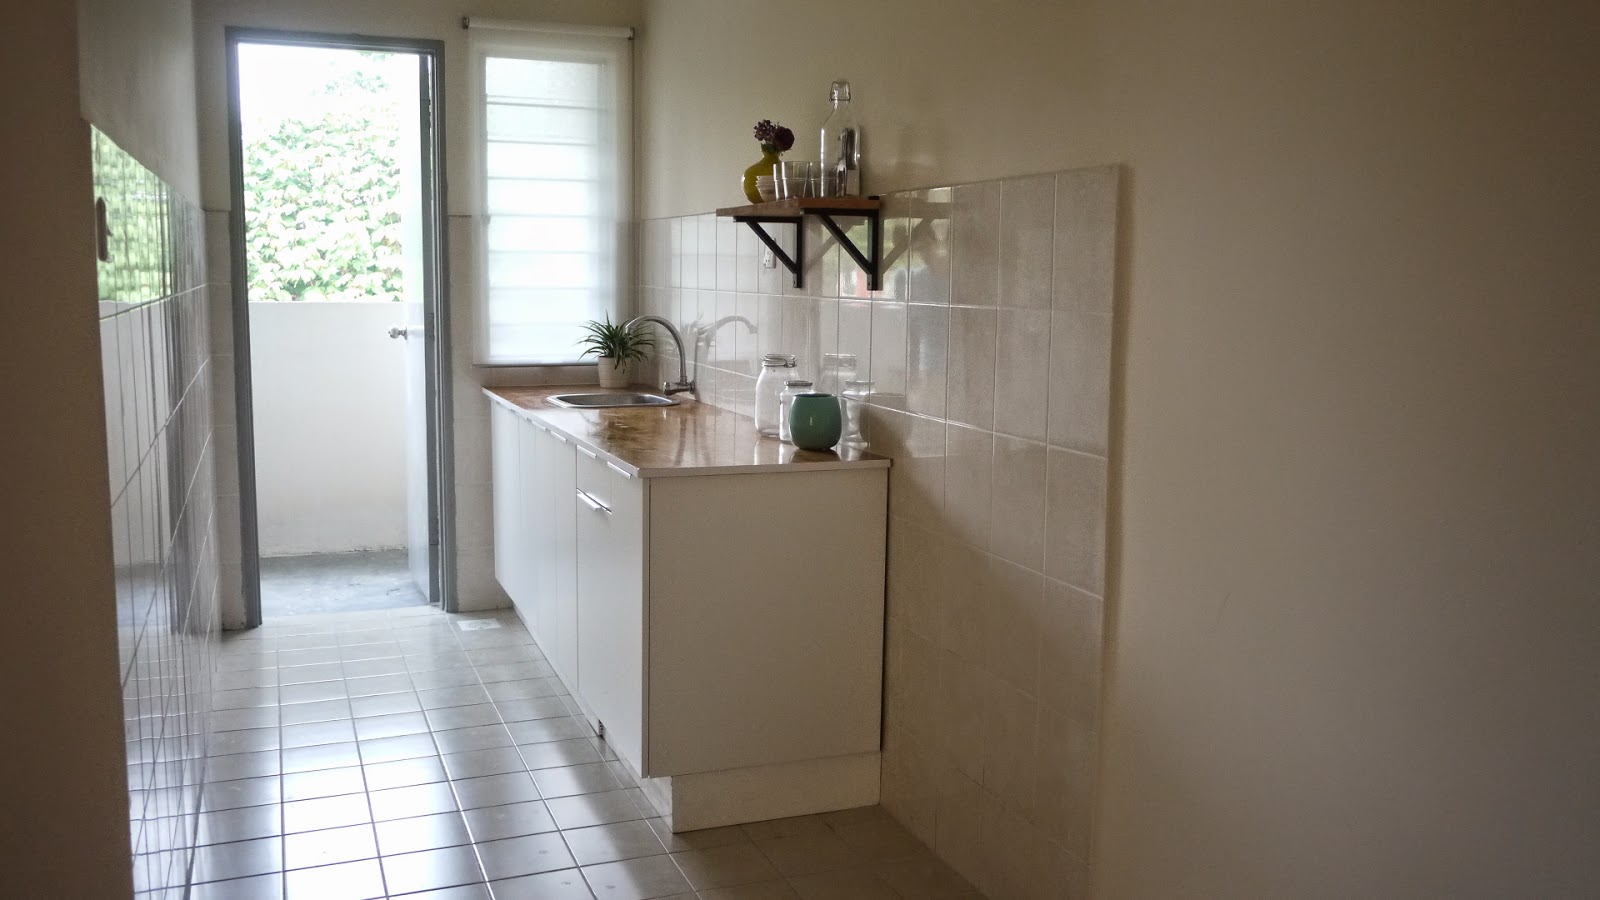 bridE to be fRom ipoH: DIY Ikea Kitchen Cabinet